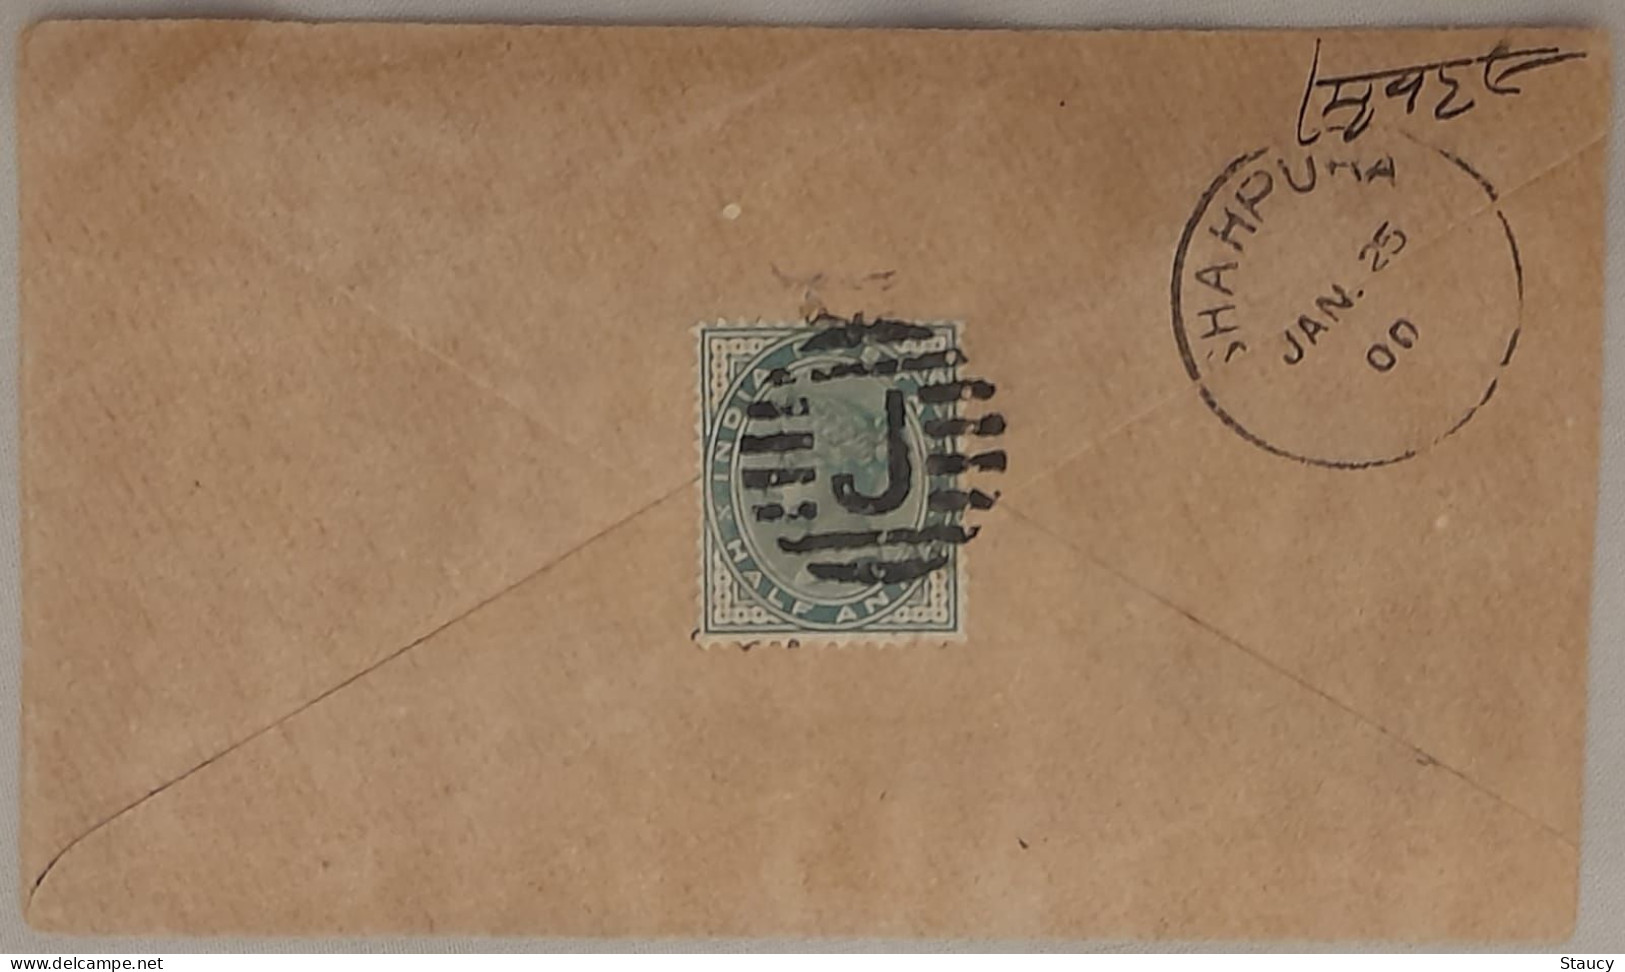 BRITISH INDIA QV UPRATED 1/2a Anna STAMPS MIAX FRANKING "JAIPUR STATE" COVER, NICE CANCEL ON FRONT & BACK As Per Scan - Jaipur